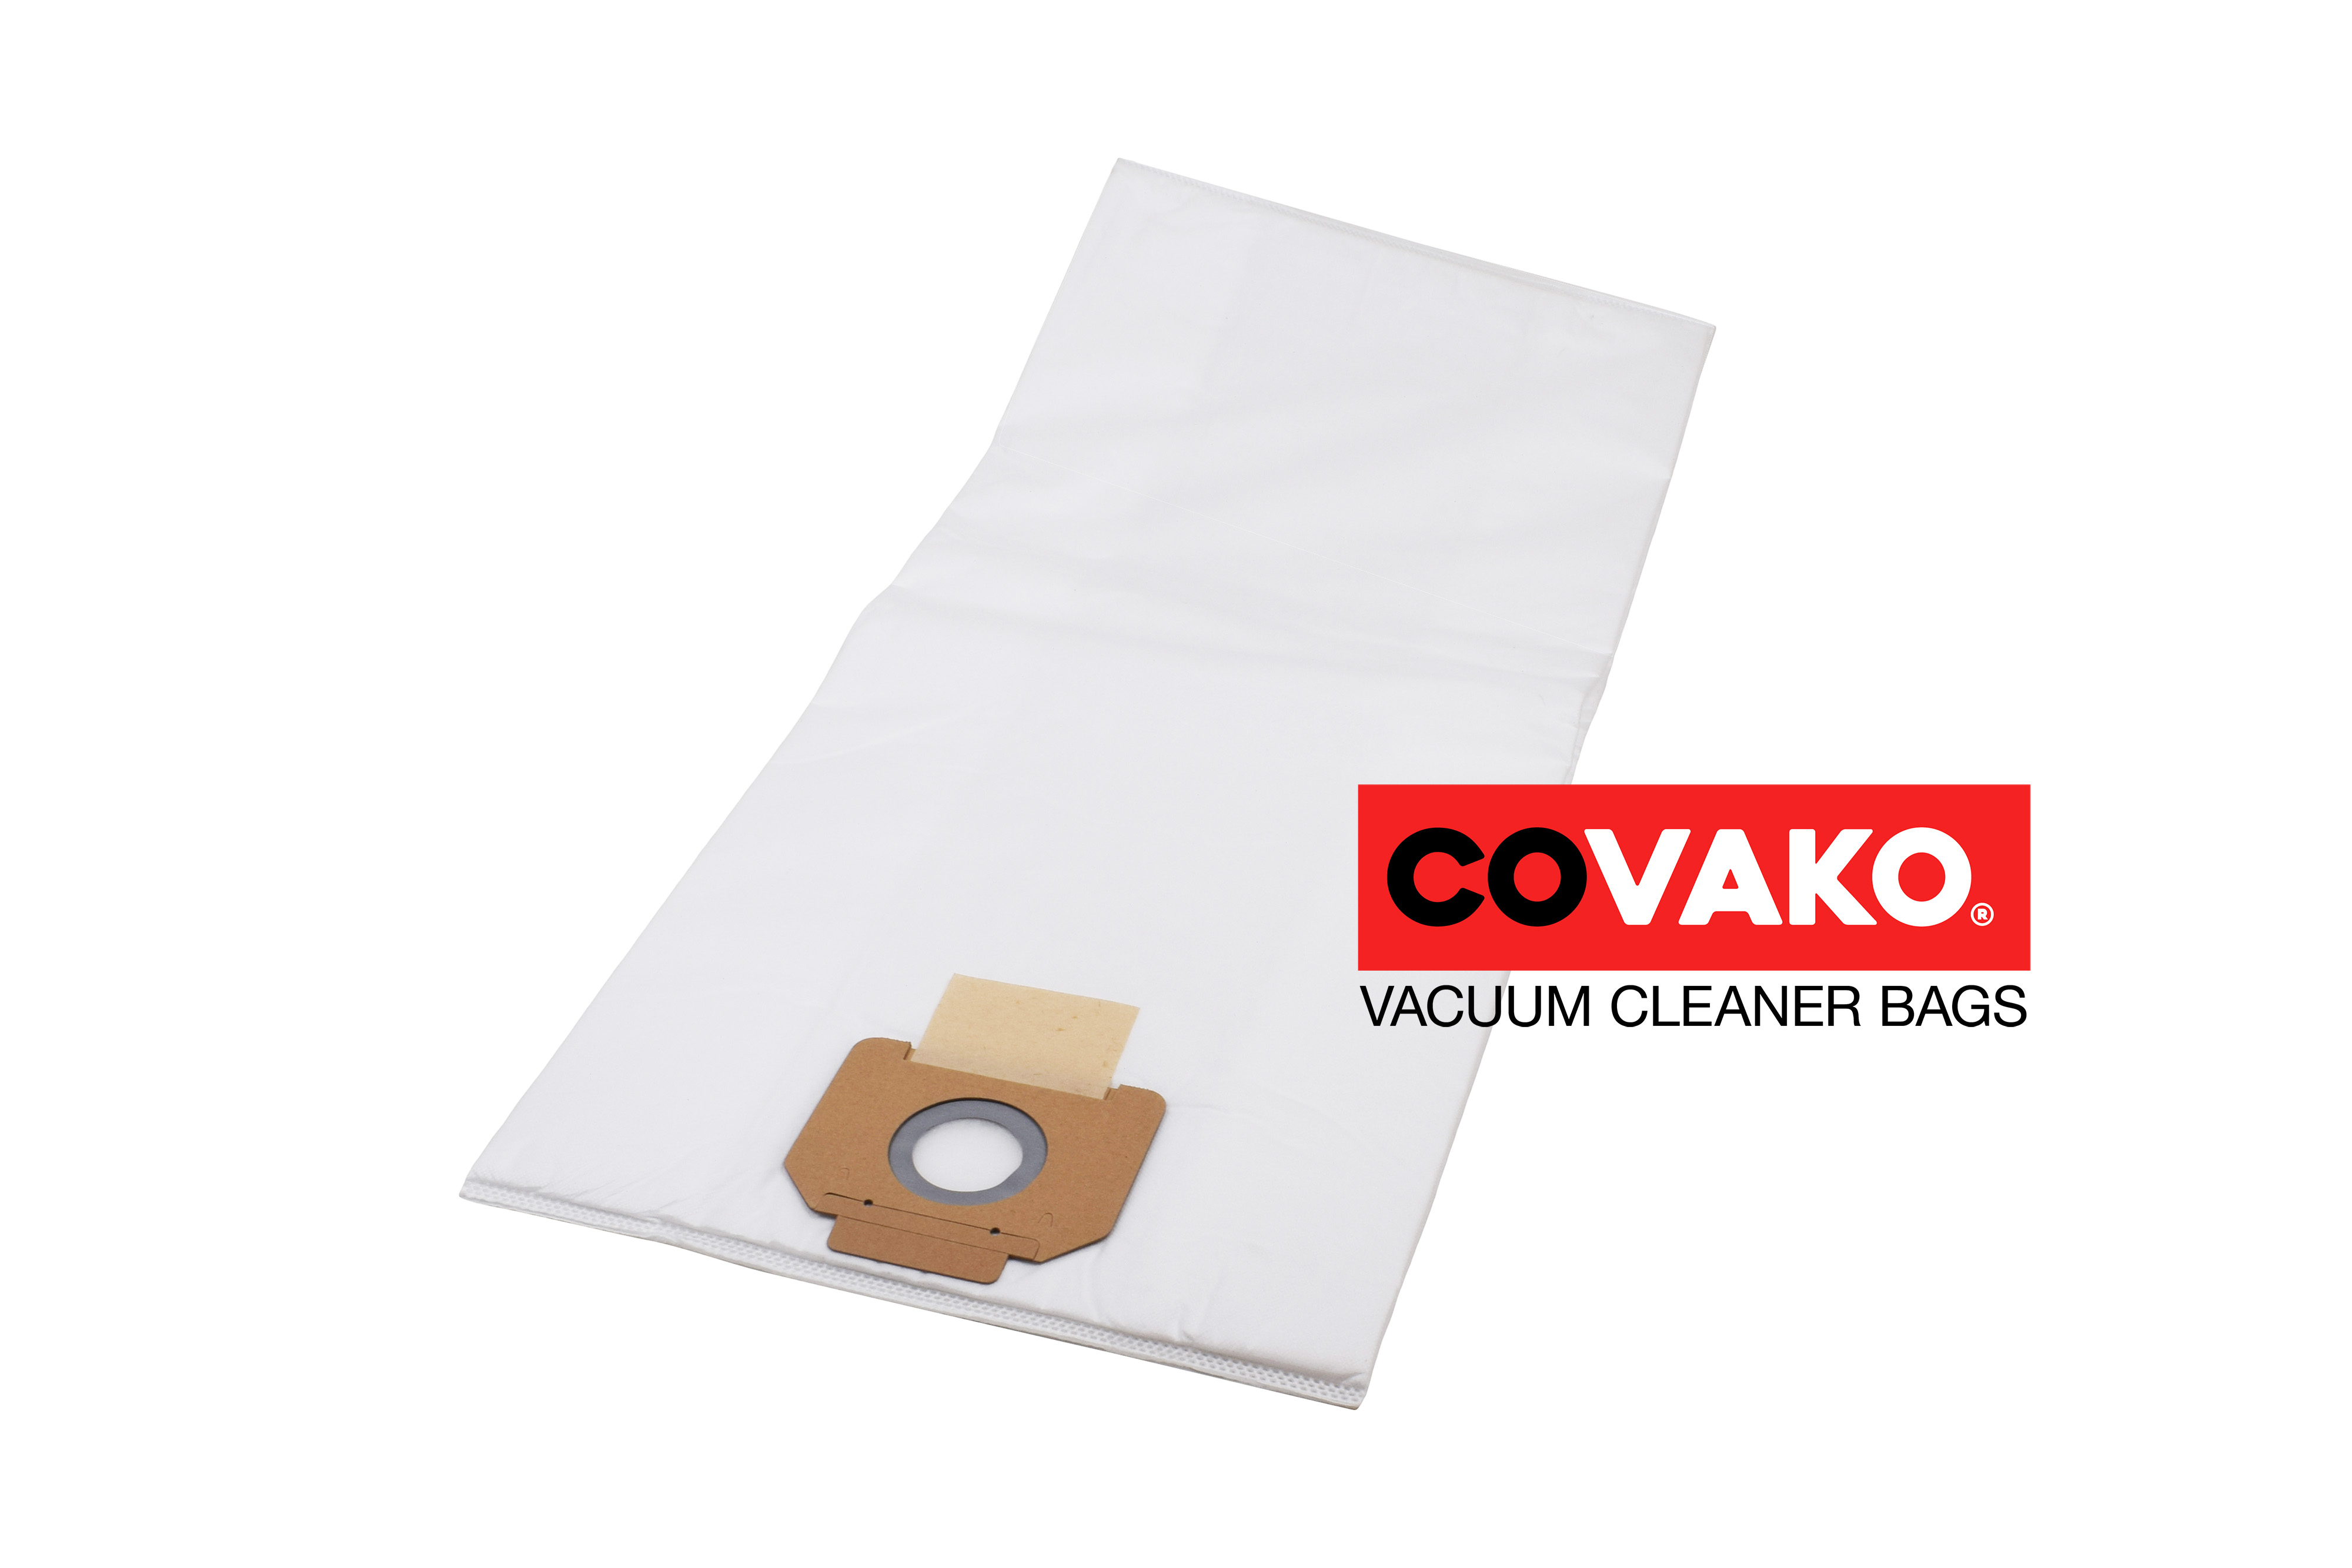 Gansow GP 3/72 W&D / Synthesis - Gansow vacuum cleaner bags